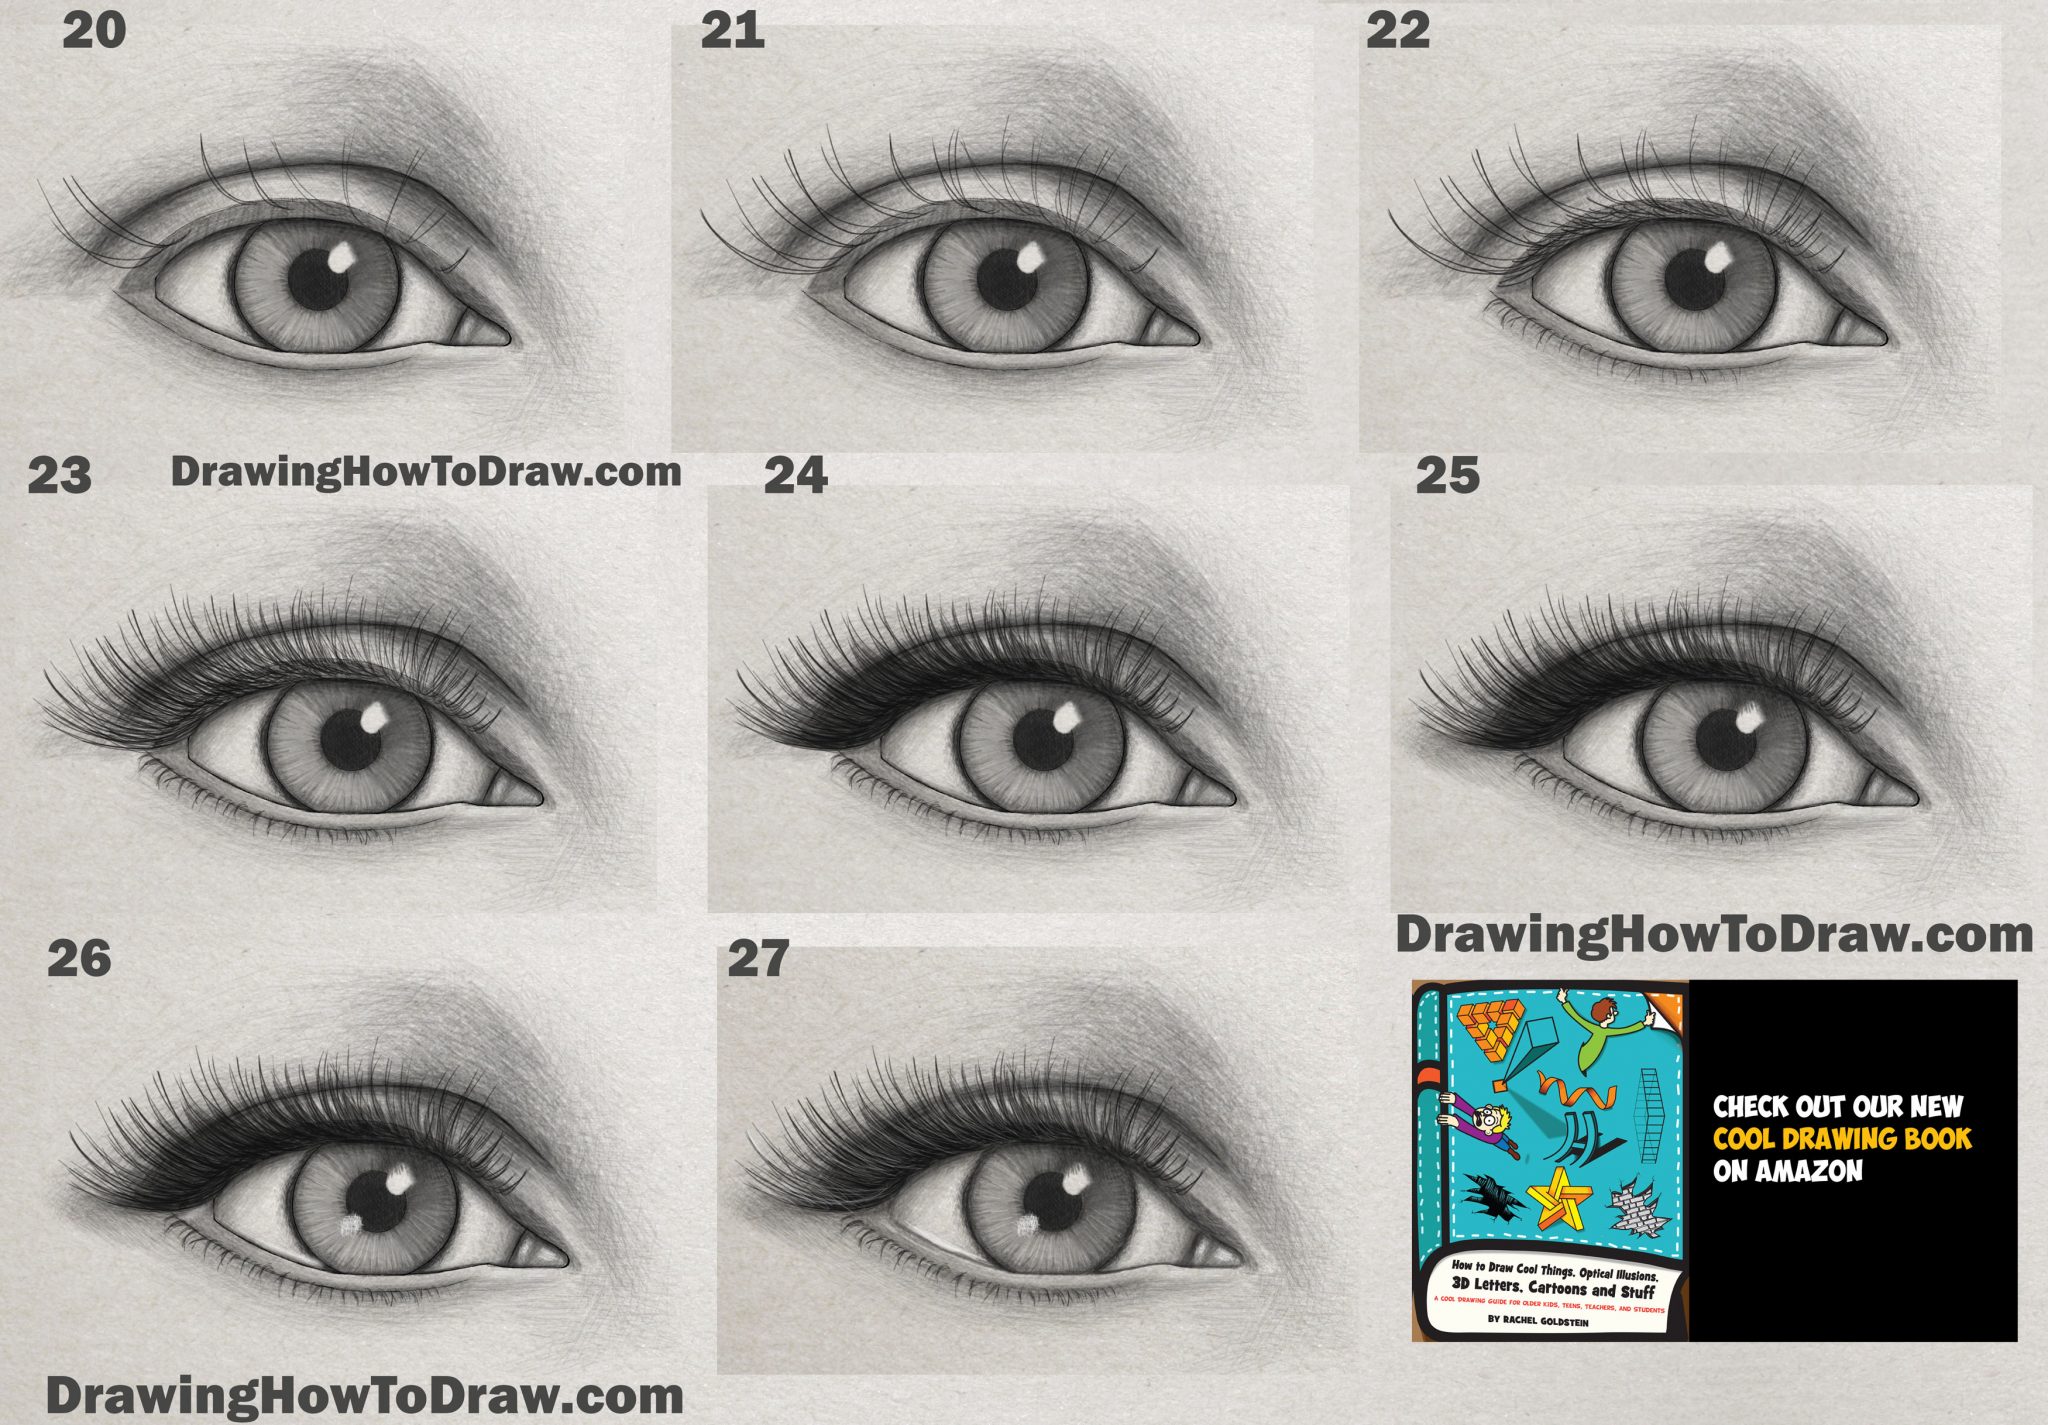 Best How To Draw Realistic Eyes Step By Step in the world The ultimate ...